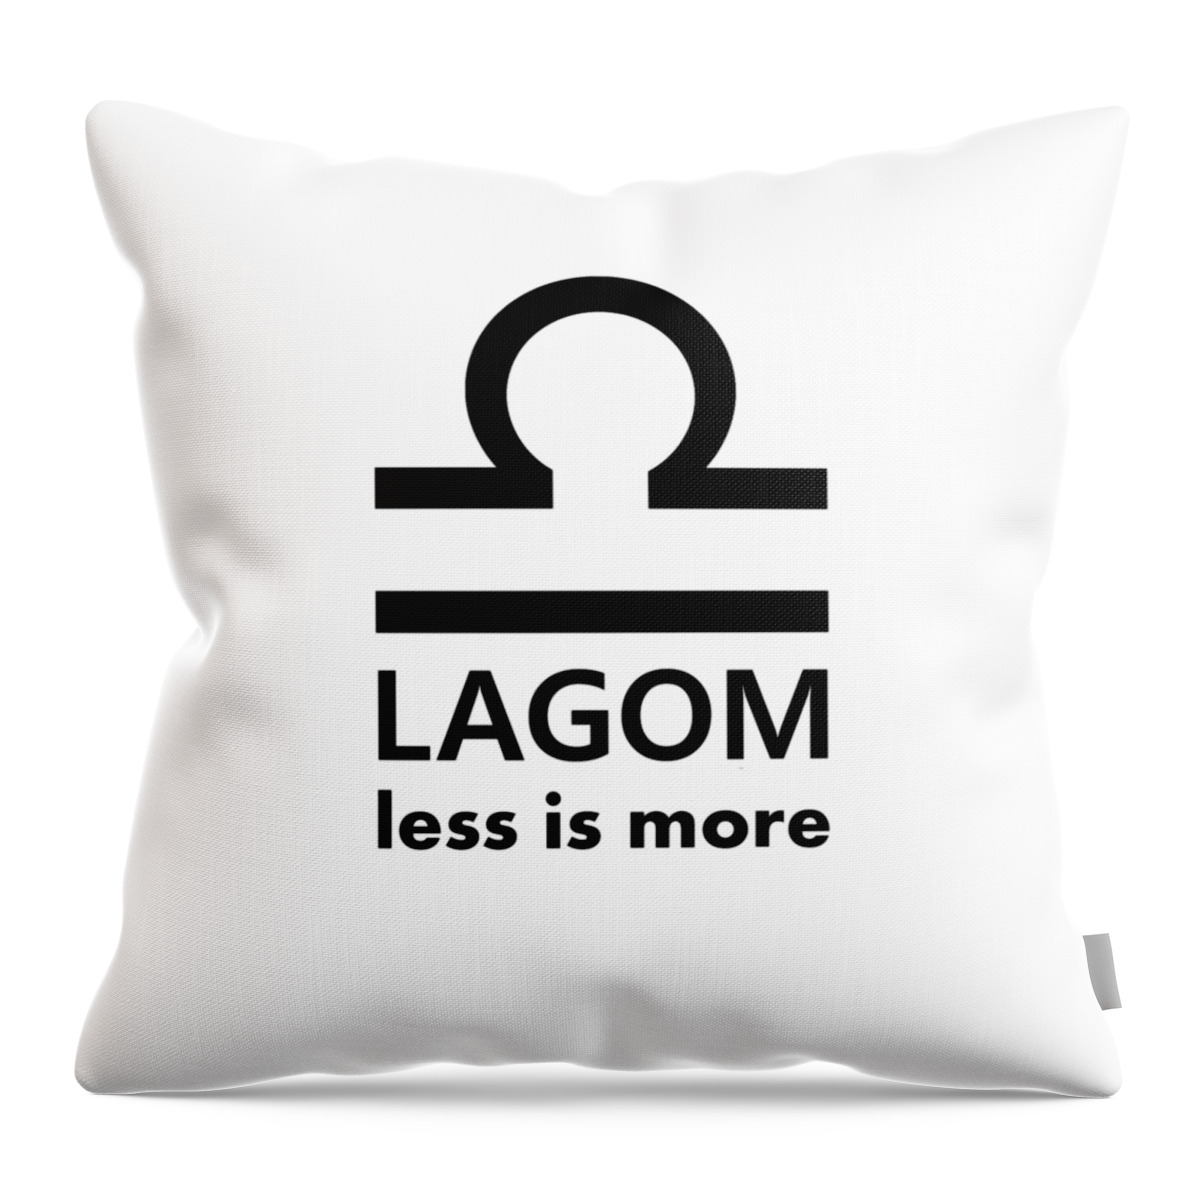 Richard Reeve Throw Pillow featuring the digital art Lagom - Less is More I by Richard Reeve